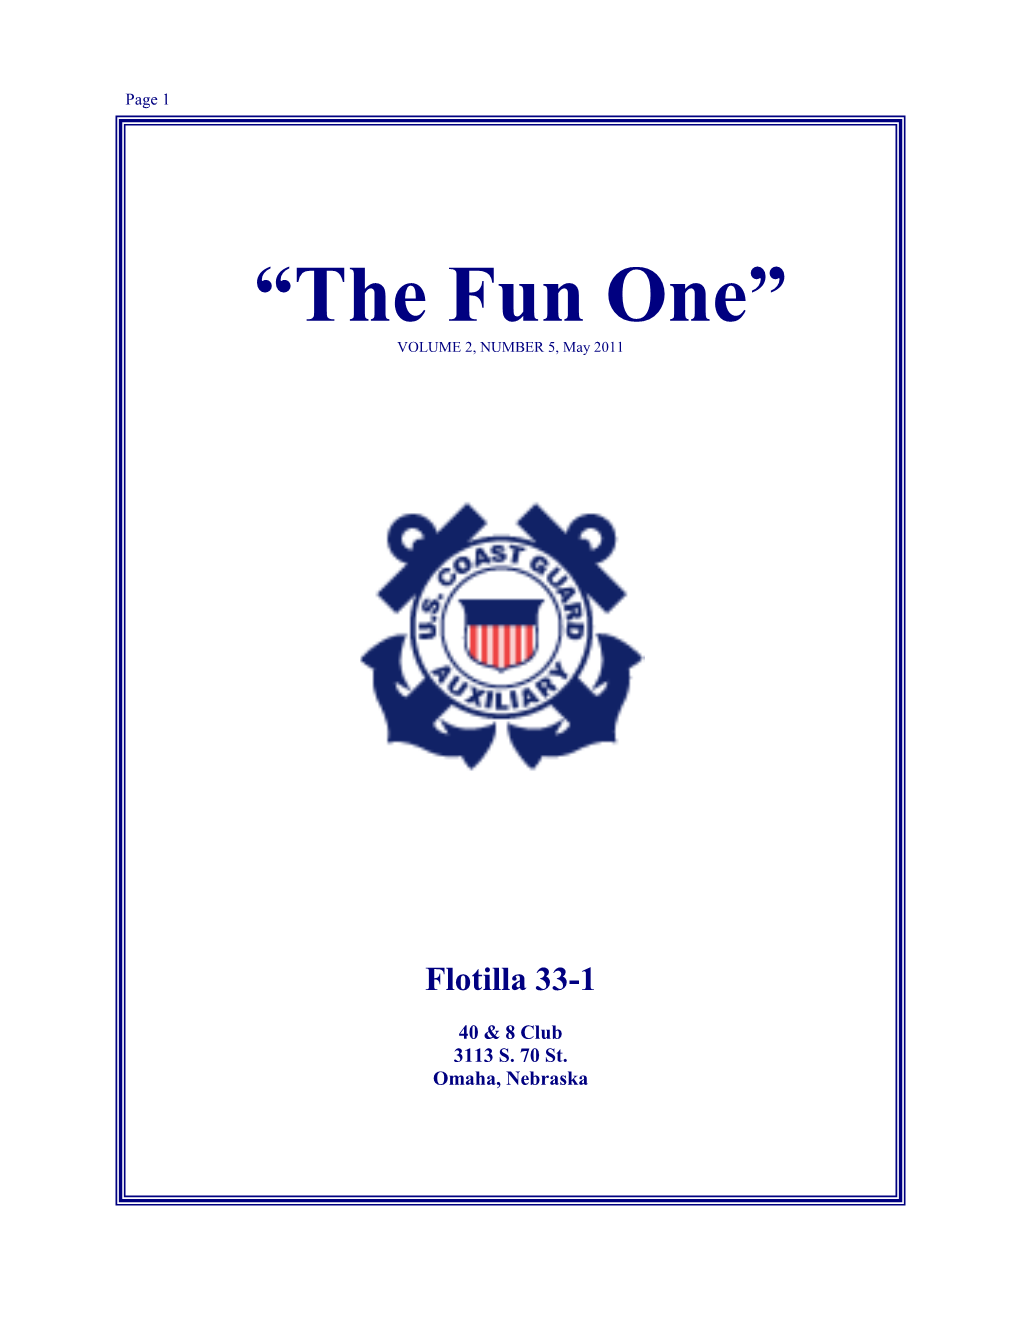 “The Fun One” VOLUME 2, NUMBER 5, May 2011